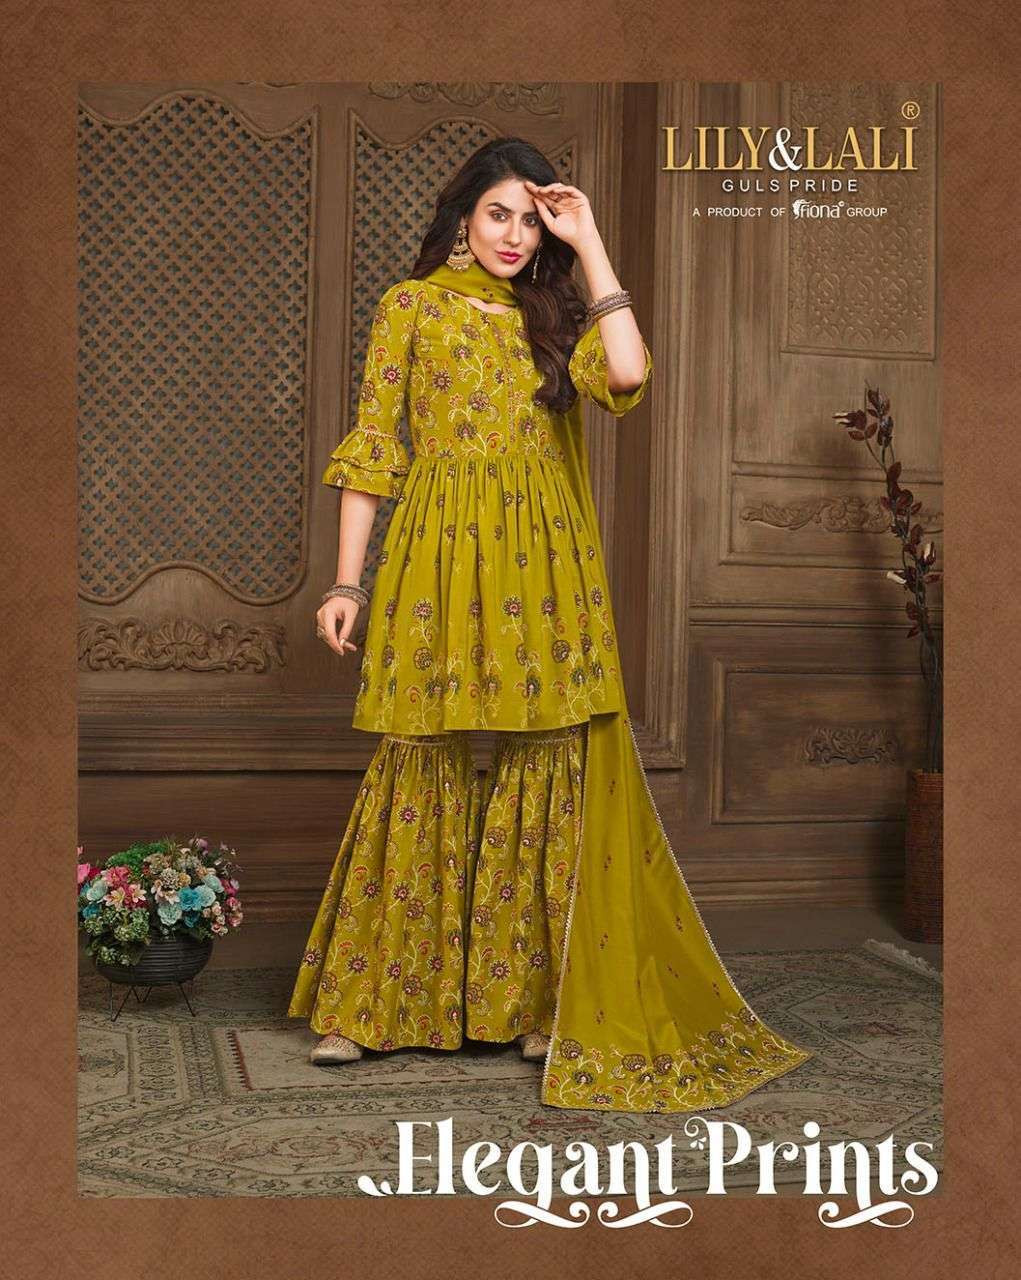 Lily & Lali elegant prints series 9011-9014 pure muslin readymade suit